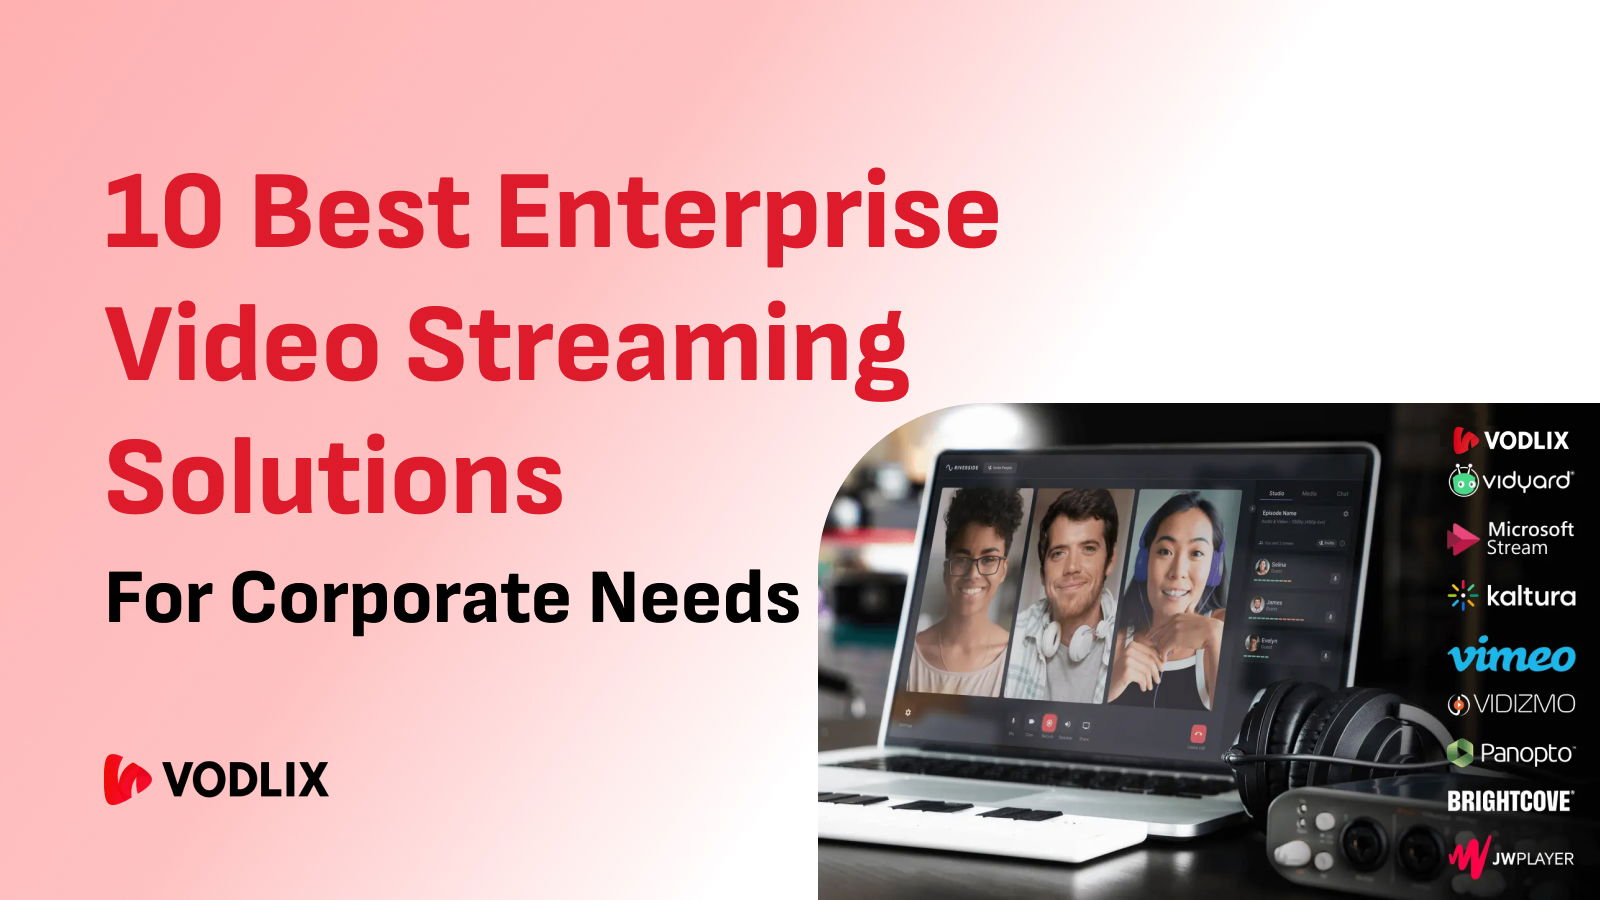 The 10 Best Enterprise Video Streaming Solutions For Corporate Needs